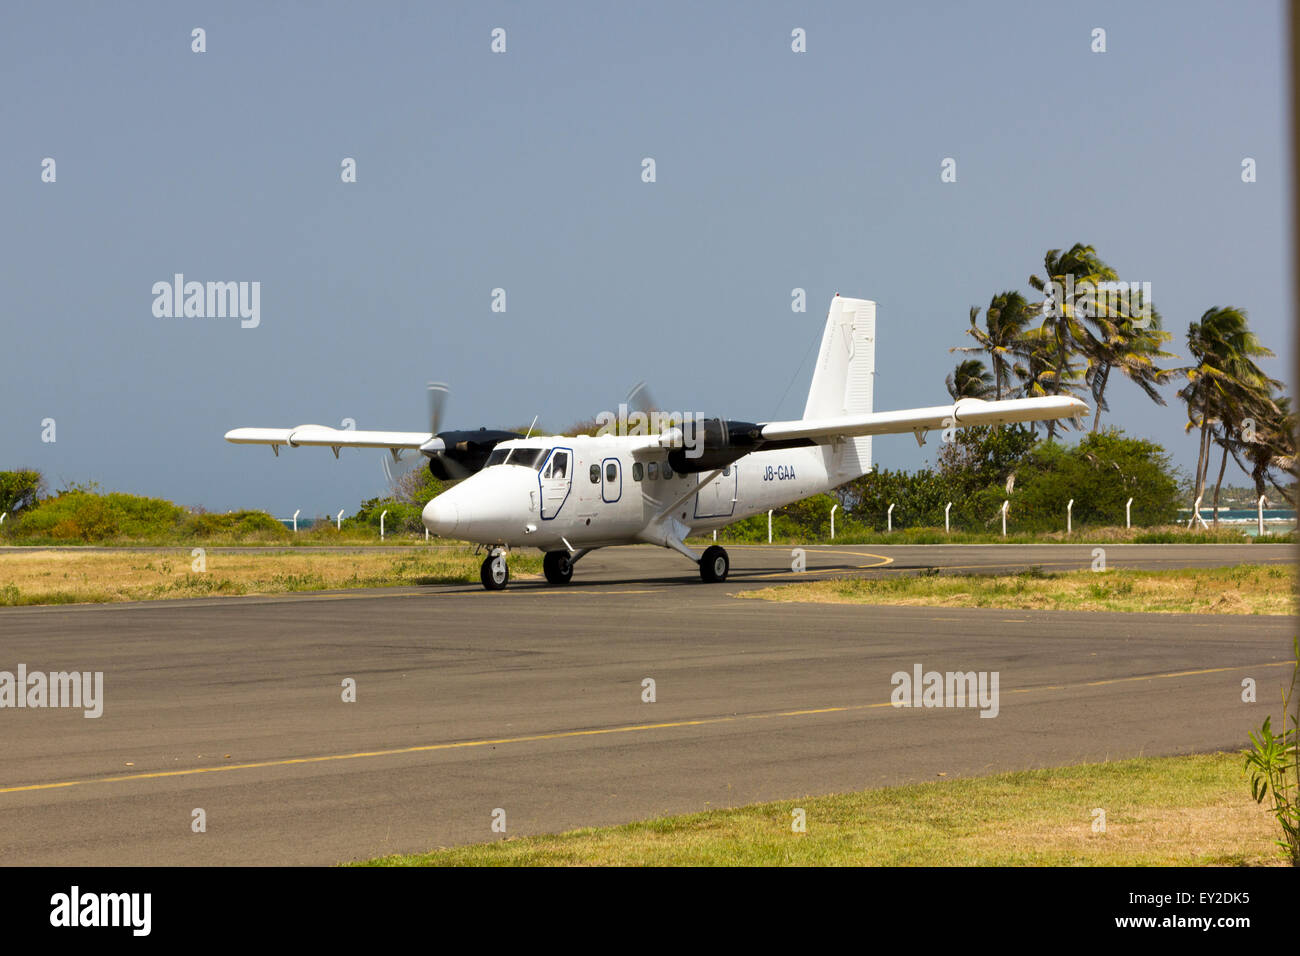 SVG Air Twin Otter Plane Taxis into Union Island Airport Stock Photo ...